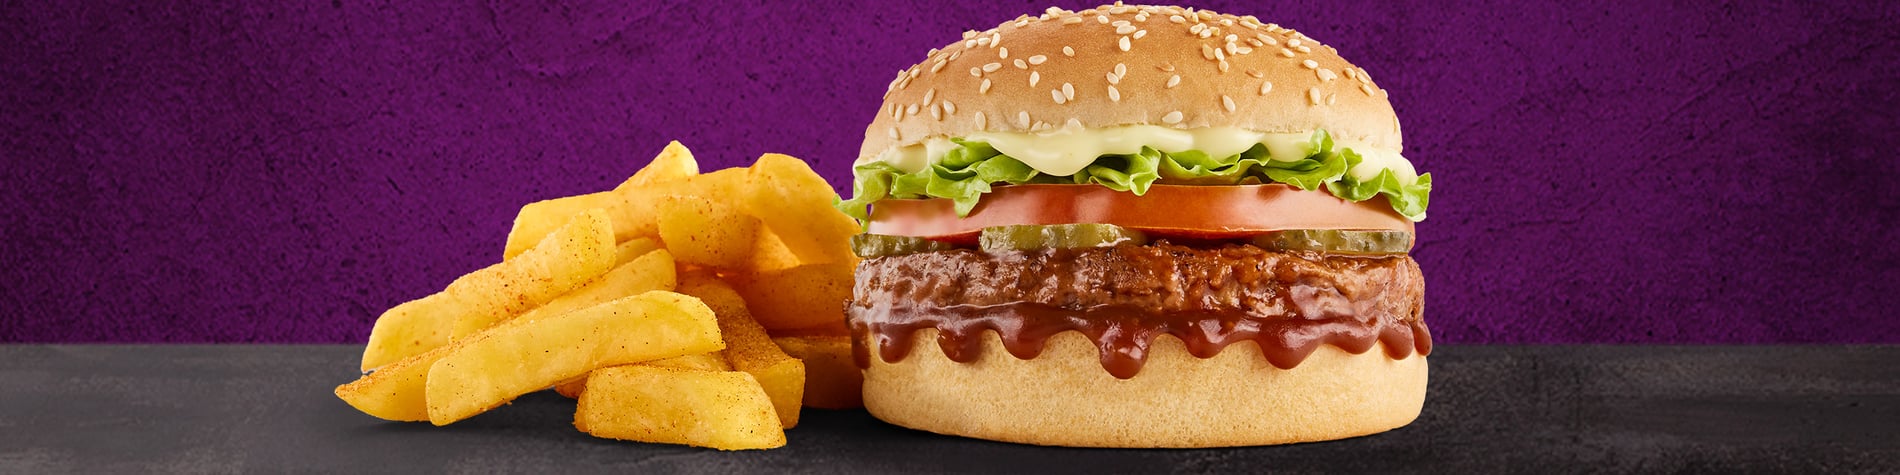 The NEW Mo’MjojoTM Burger Meal from Steers® Cornubia. 2 Flame-Grilled pure beef patties, pineapple, macon, tomato, lettuce, and small Famous Hand-Cut Chips, on a purple background.